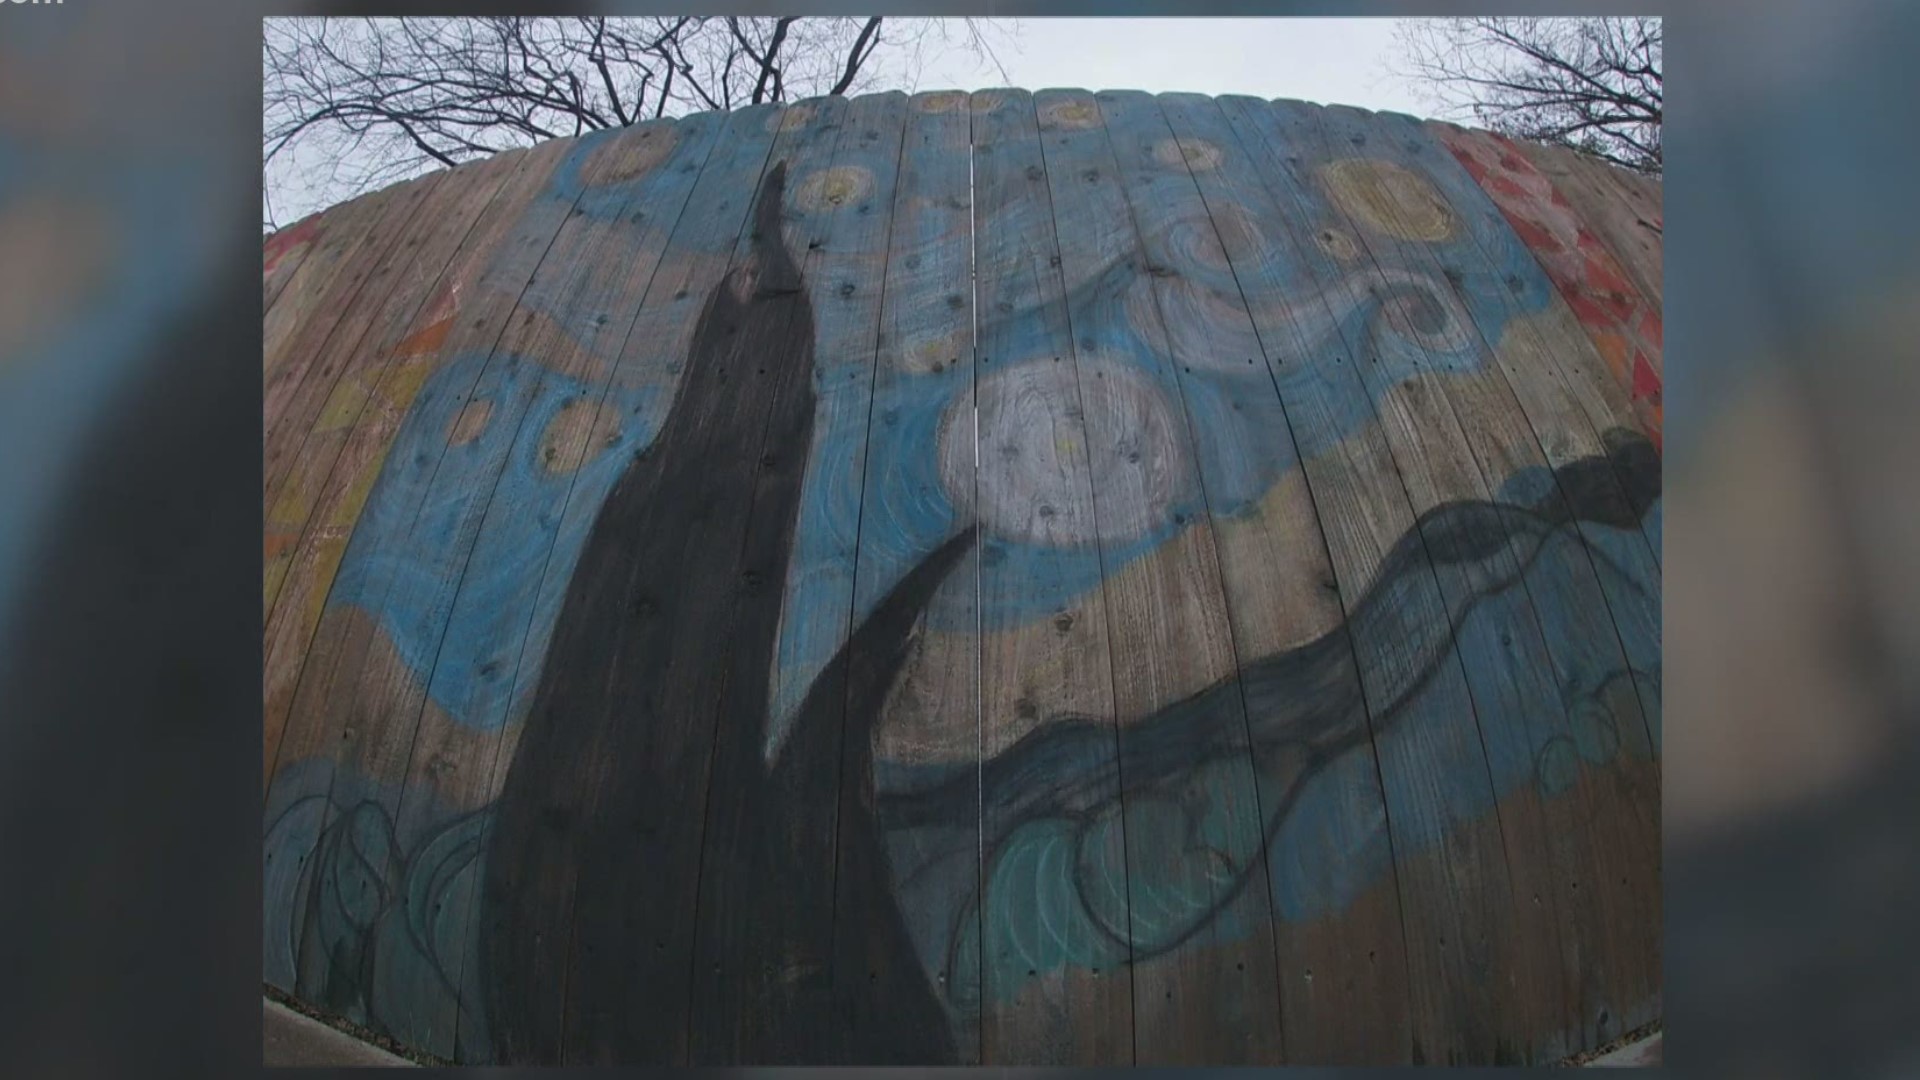 This local artist is using her fence to create her artwork.